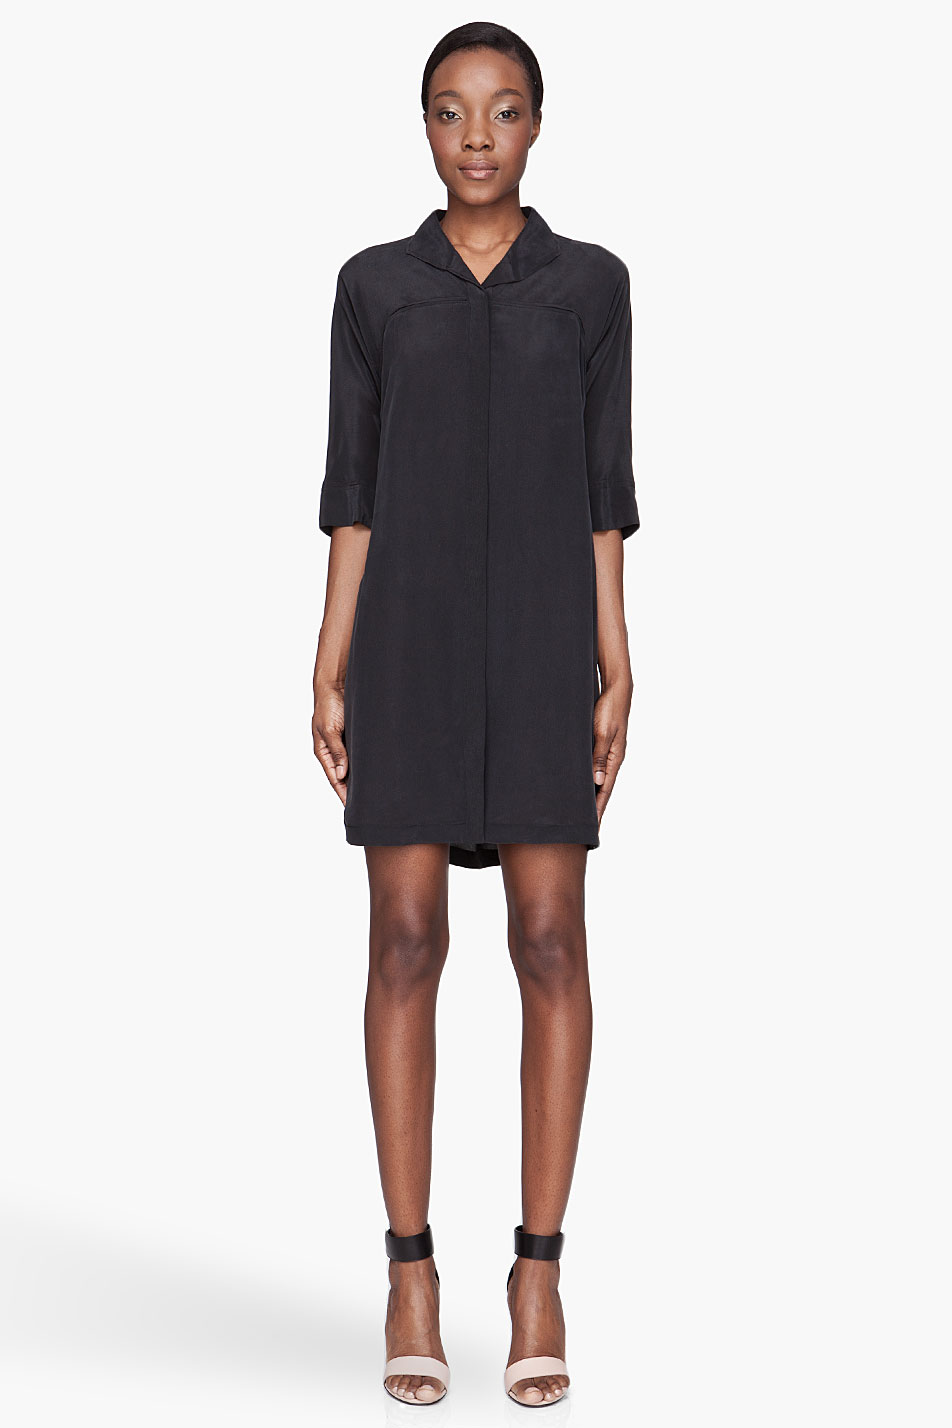 Lyst - See By Chloé Black Silk Button Up Shirt Dress in Black